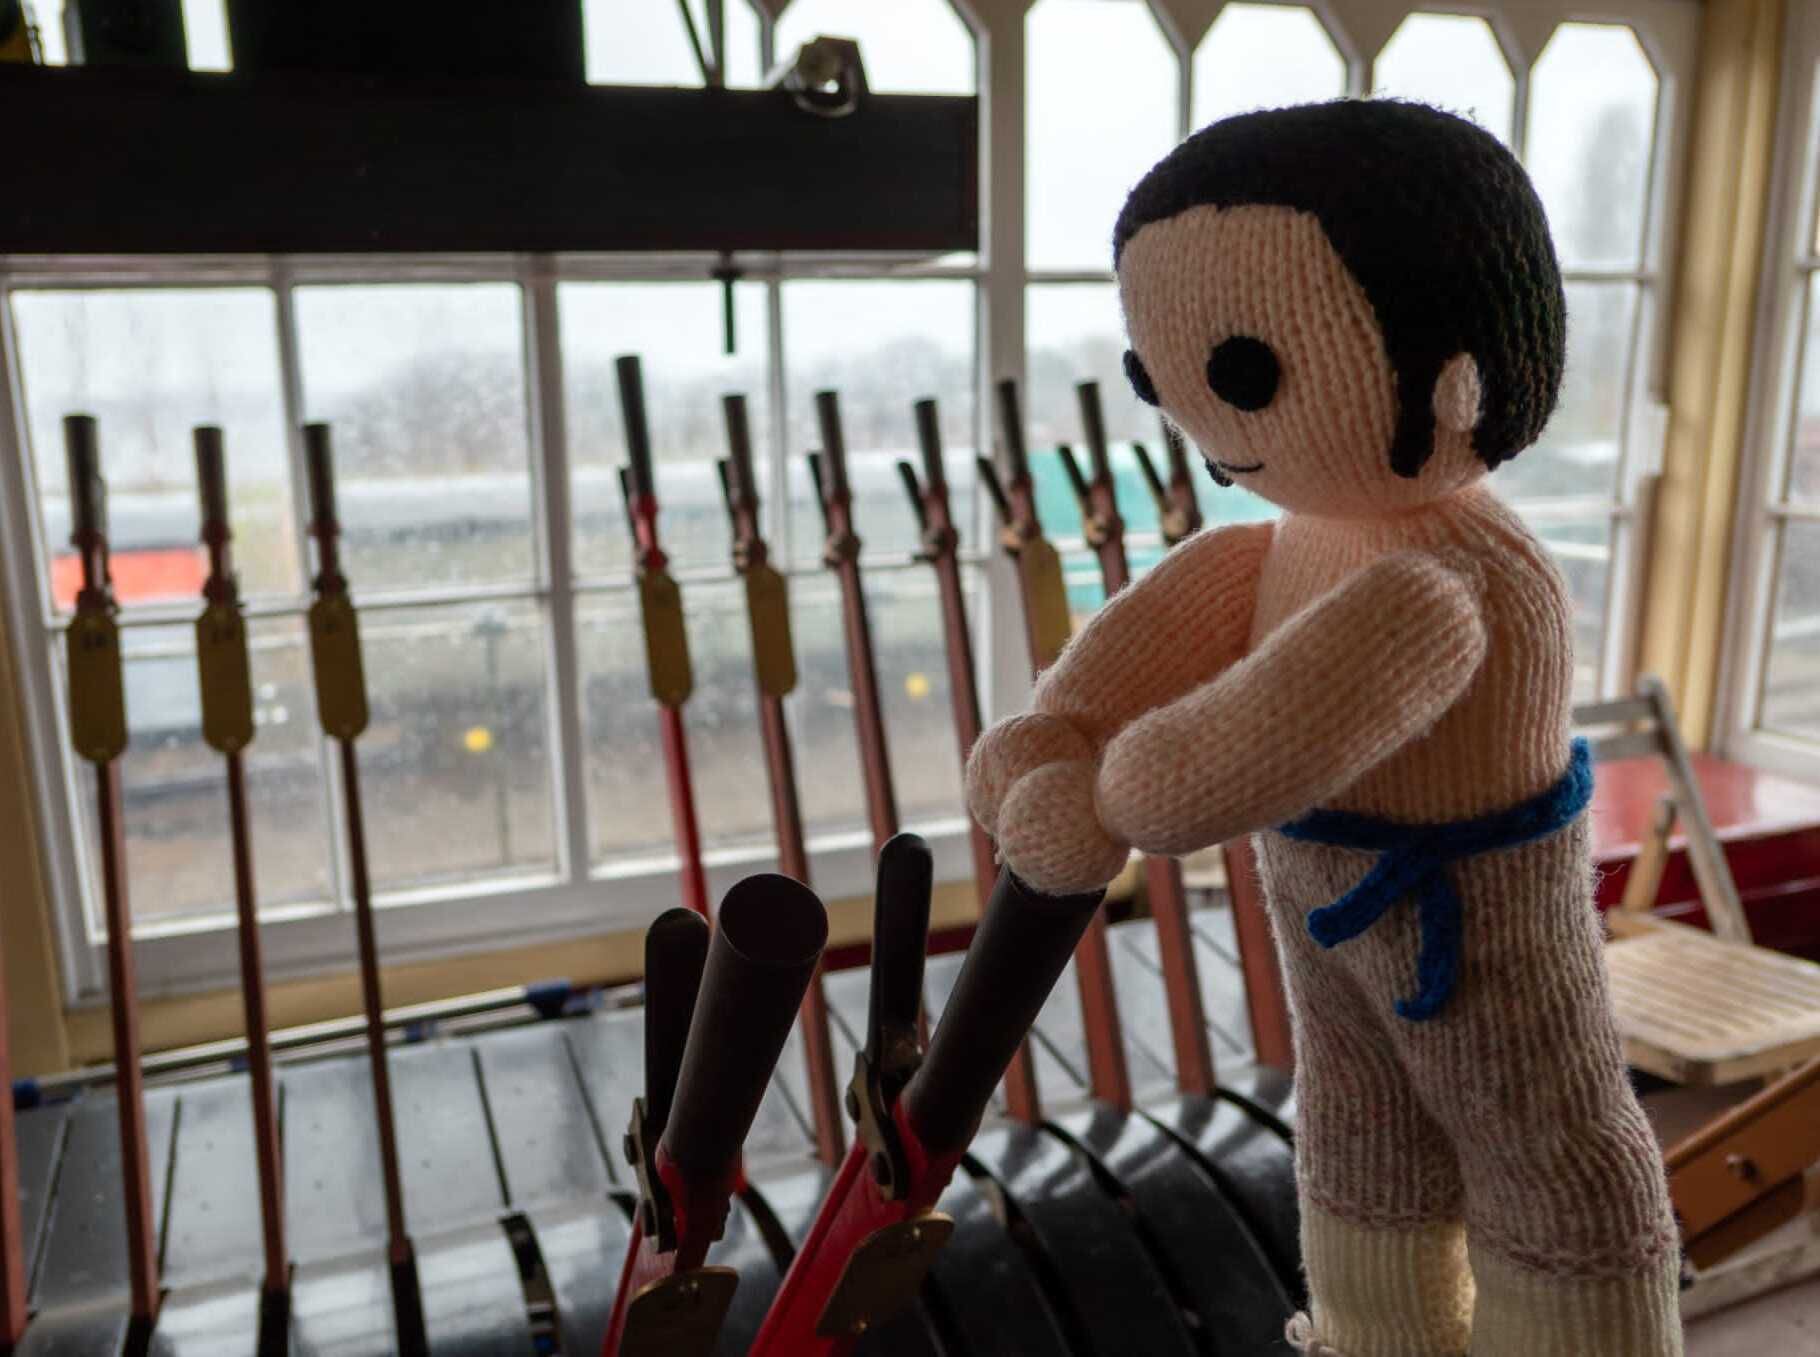 Black Country fighter the Tipton Slasher gets his own calendar - in adorable knitted form